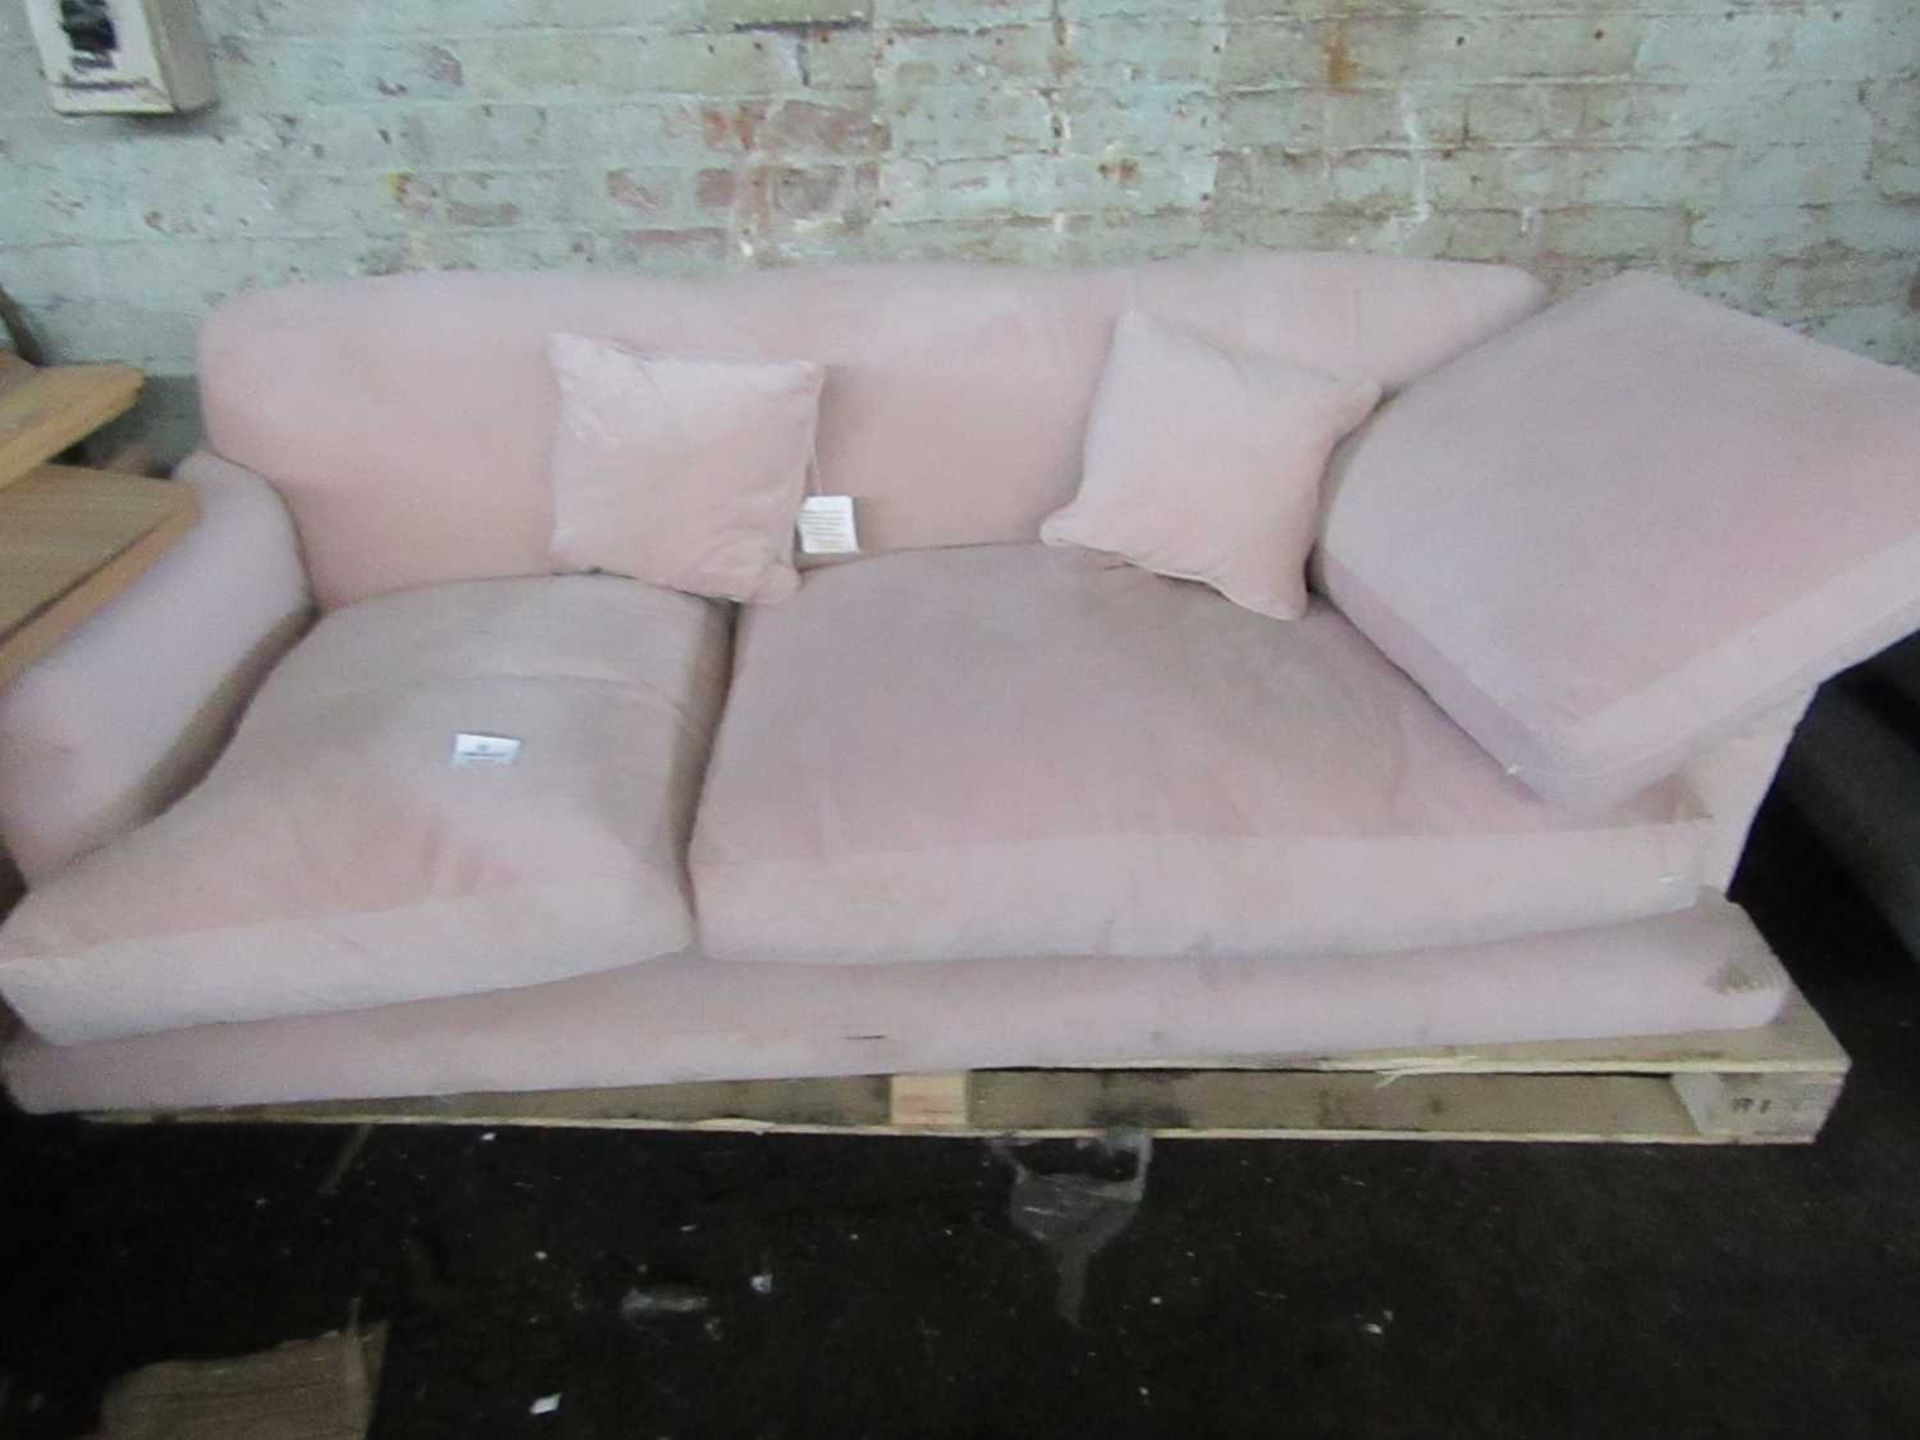 VAT PALLET WITH A SWOON SOFA PART. UNCHECKED